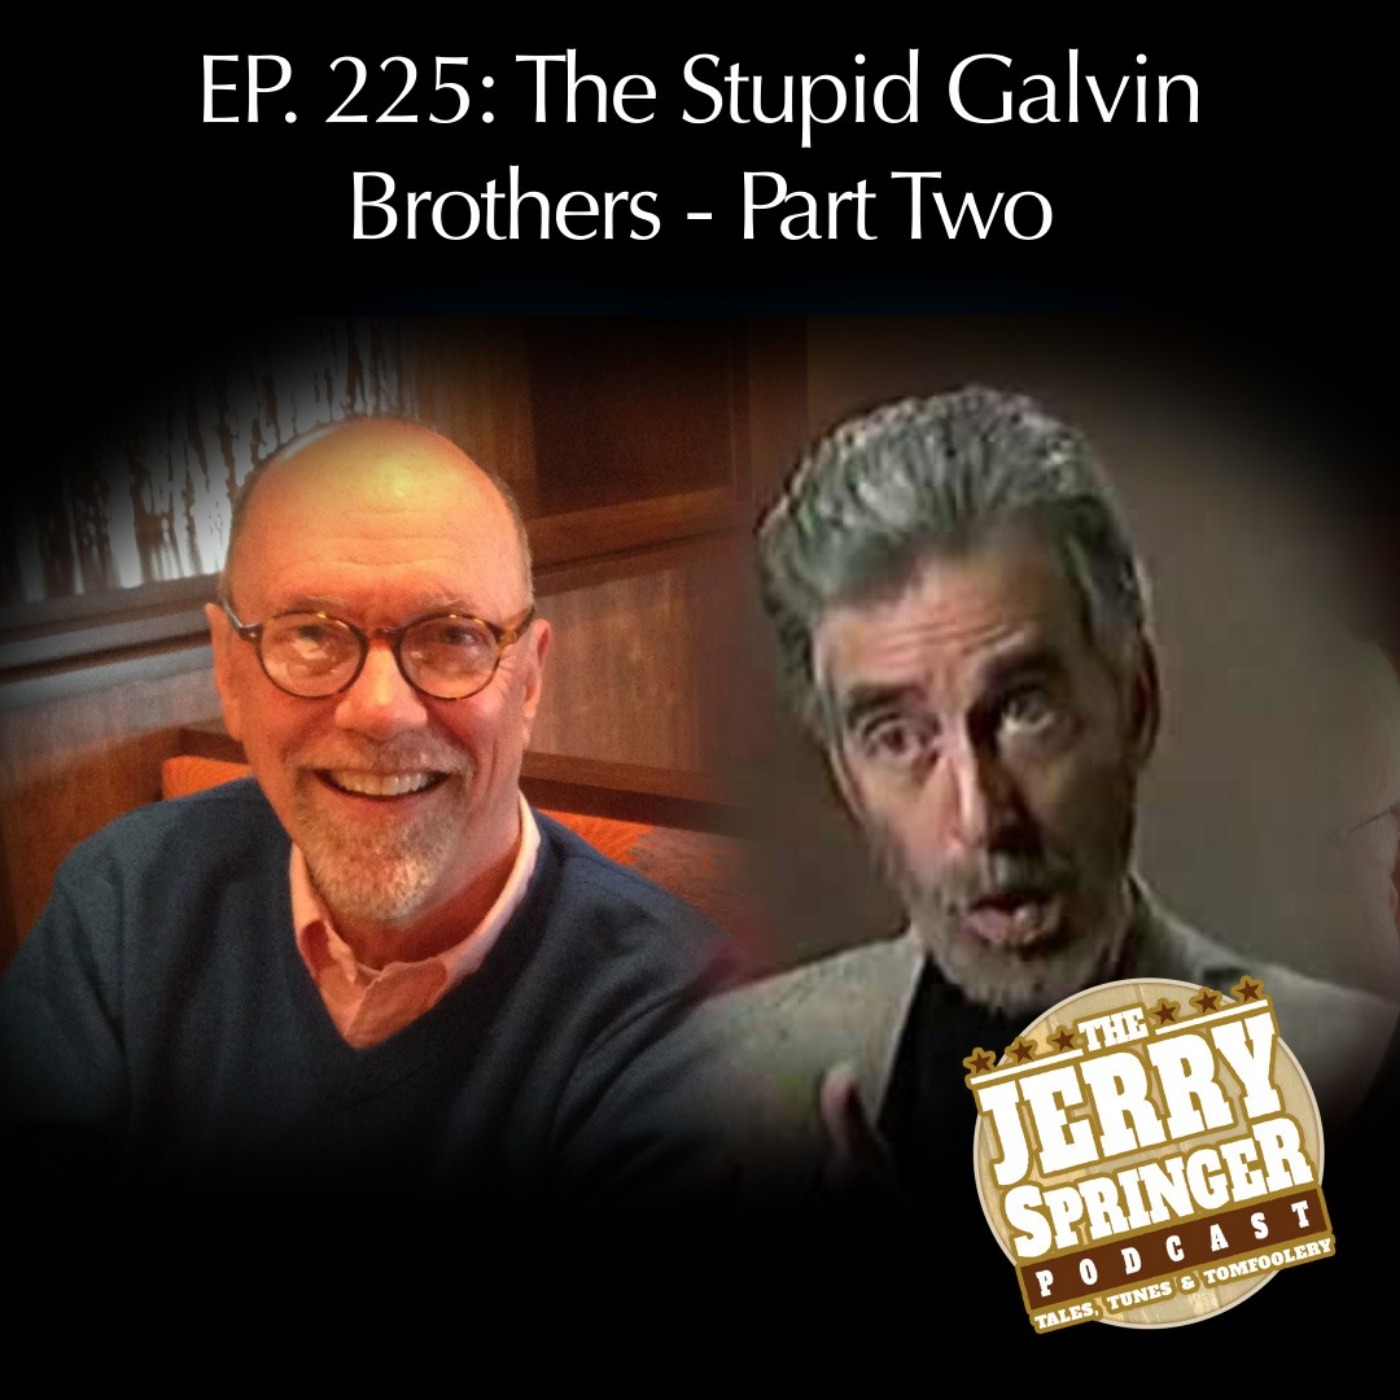 Guest Hosts: The Stupid Galvin Brothers. Episode 225